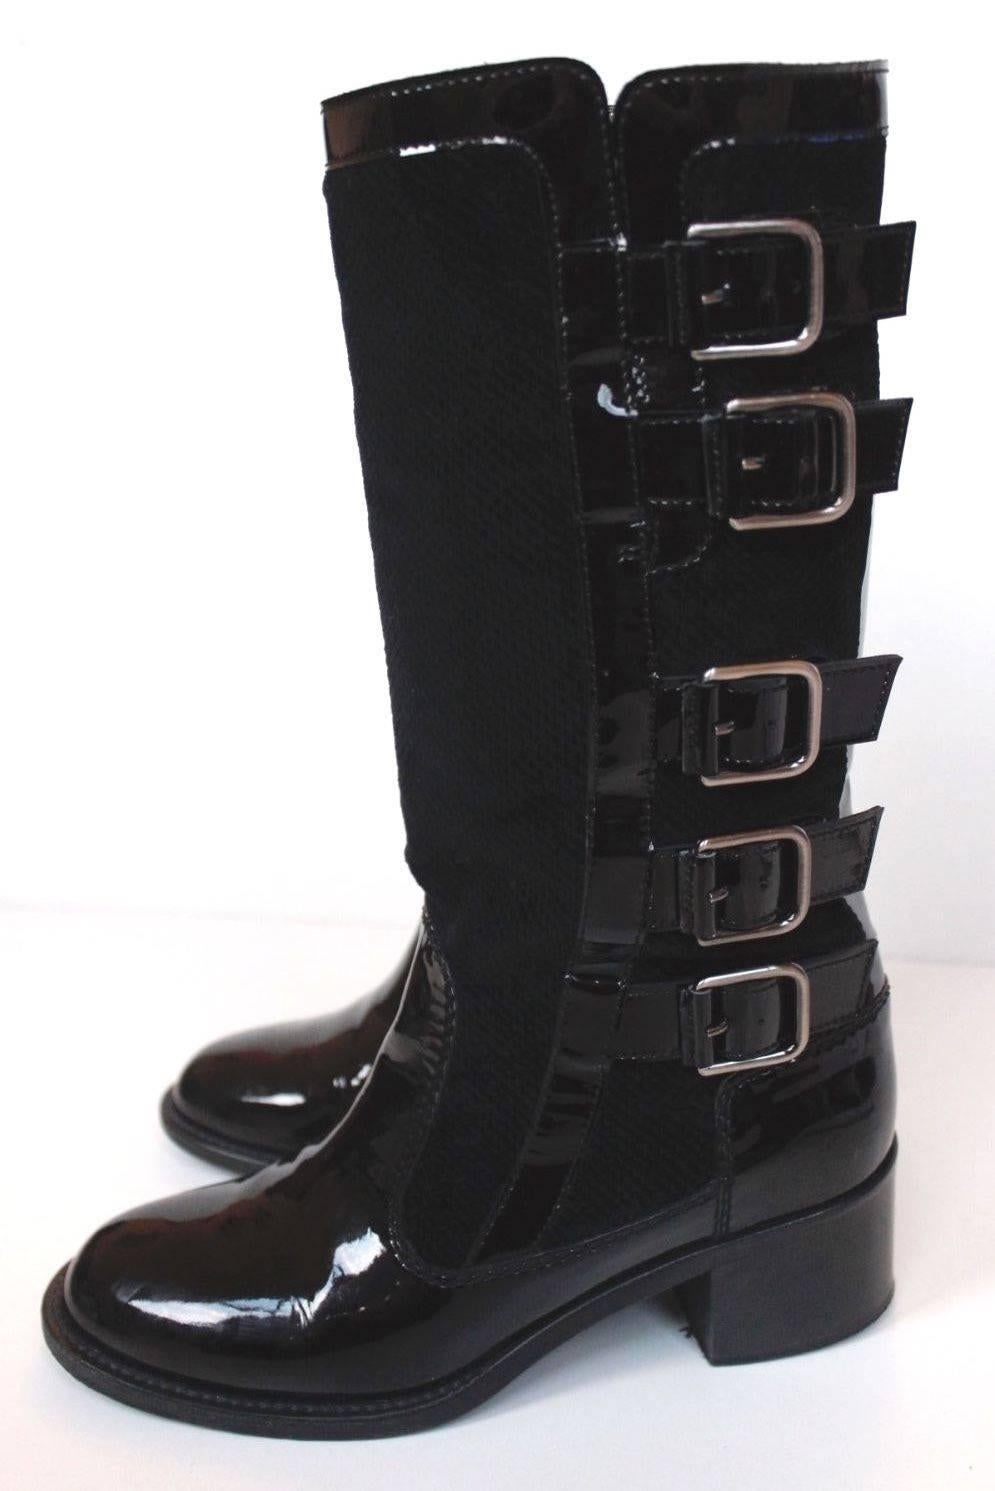 CHANEL Black Patent Leather Multi Buckle Boots 36.5 UK 3.5 For Sale 2